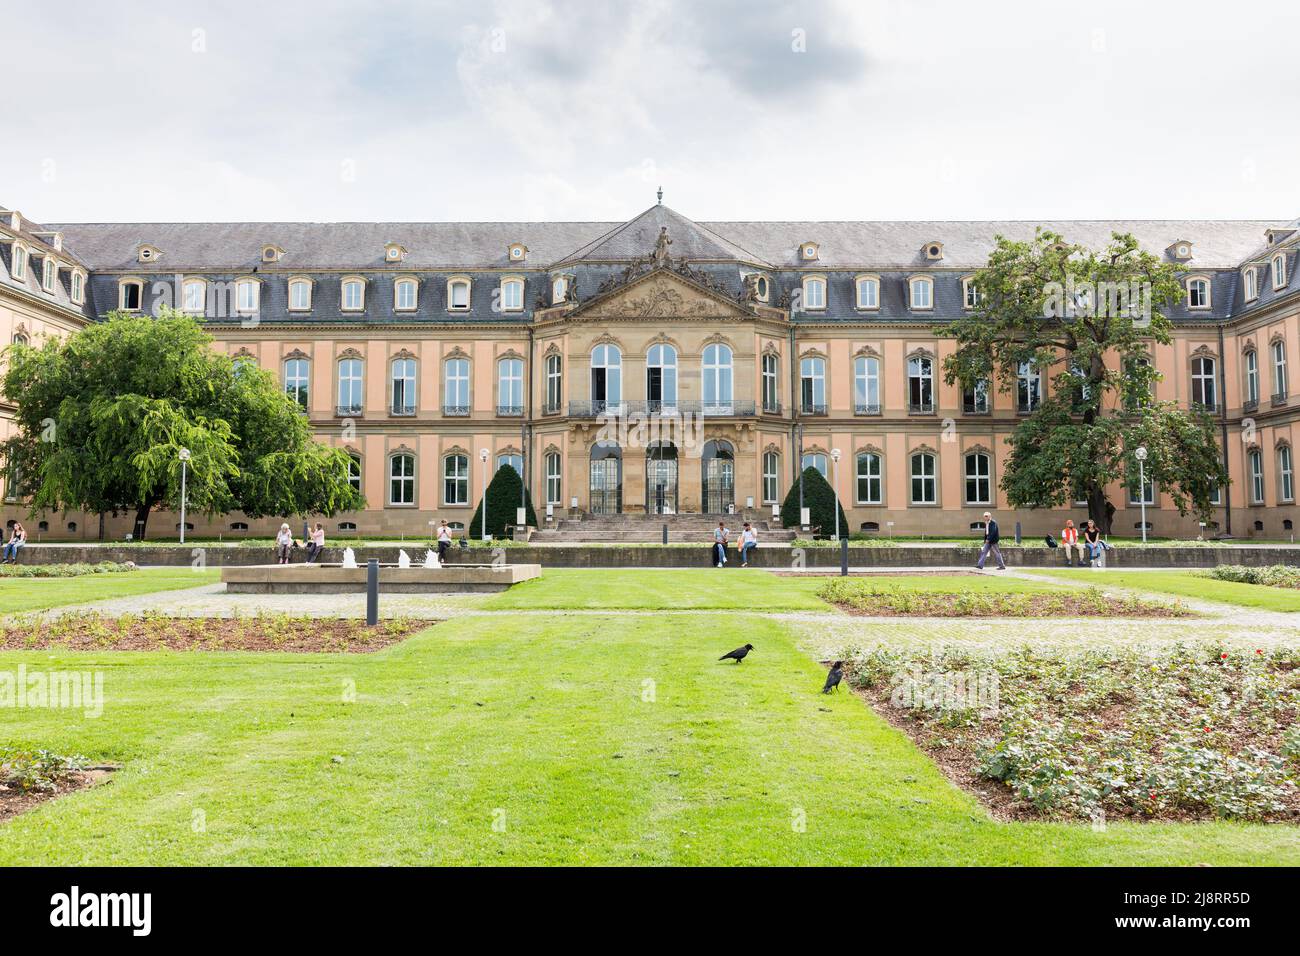 Stuttgart, Germany - Jul 27, 2021: View on the Neues Schloss  (new palace), captured from the Oberer Schlossgarten. Seat of the state government of Ba Stock Photo